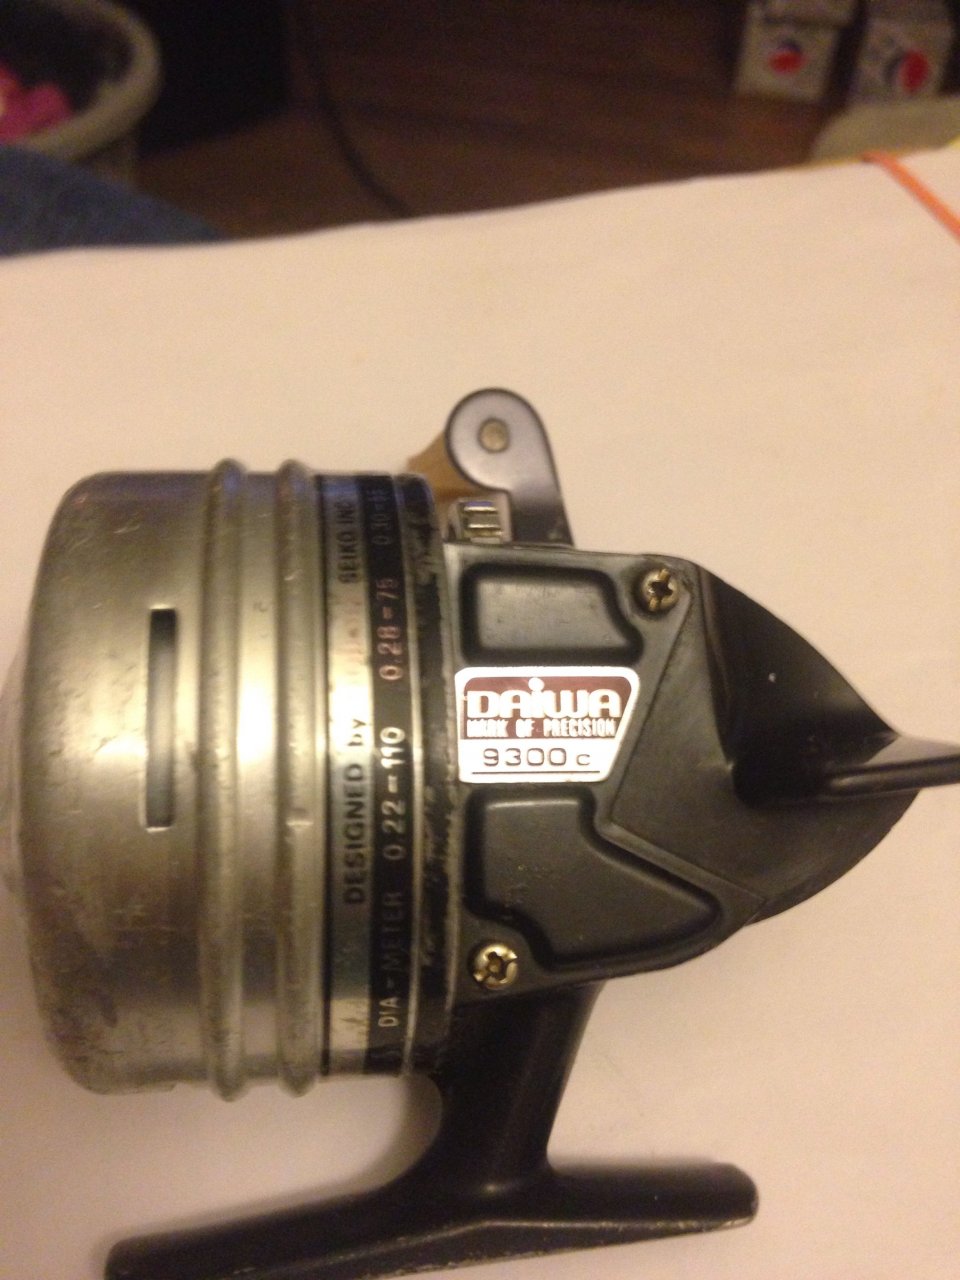 Daiwa 7290 classic spin fishing reel how to take apart and service 